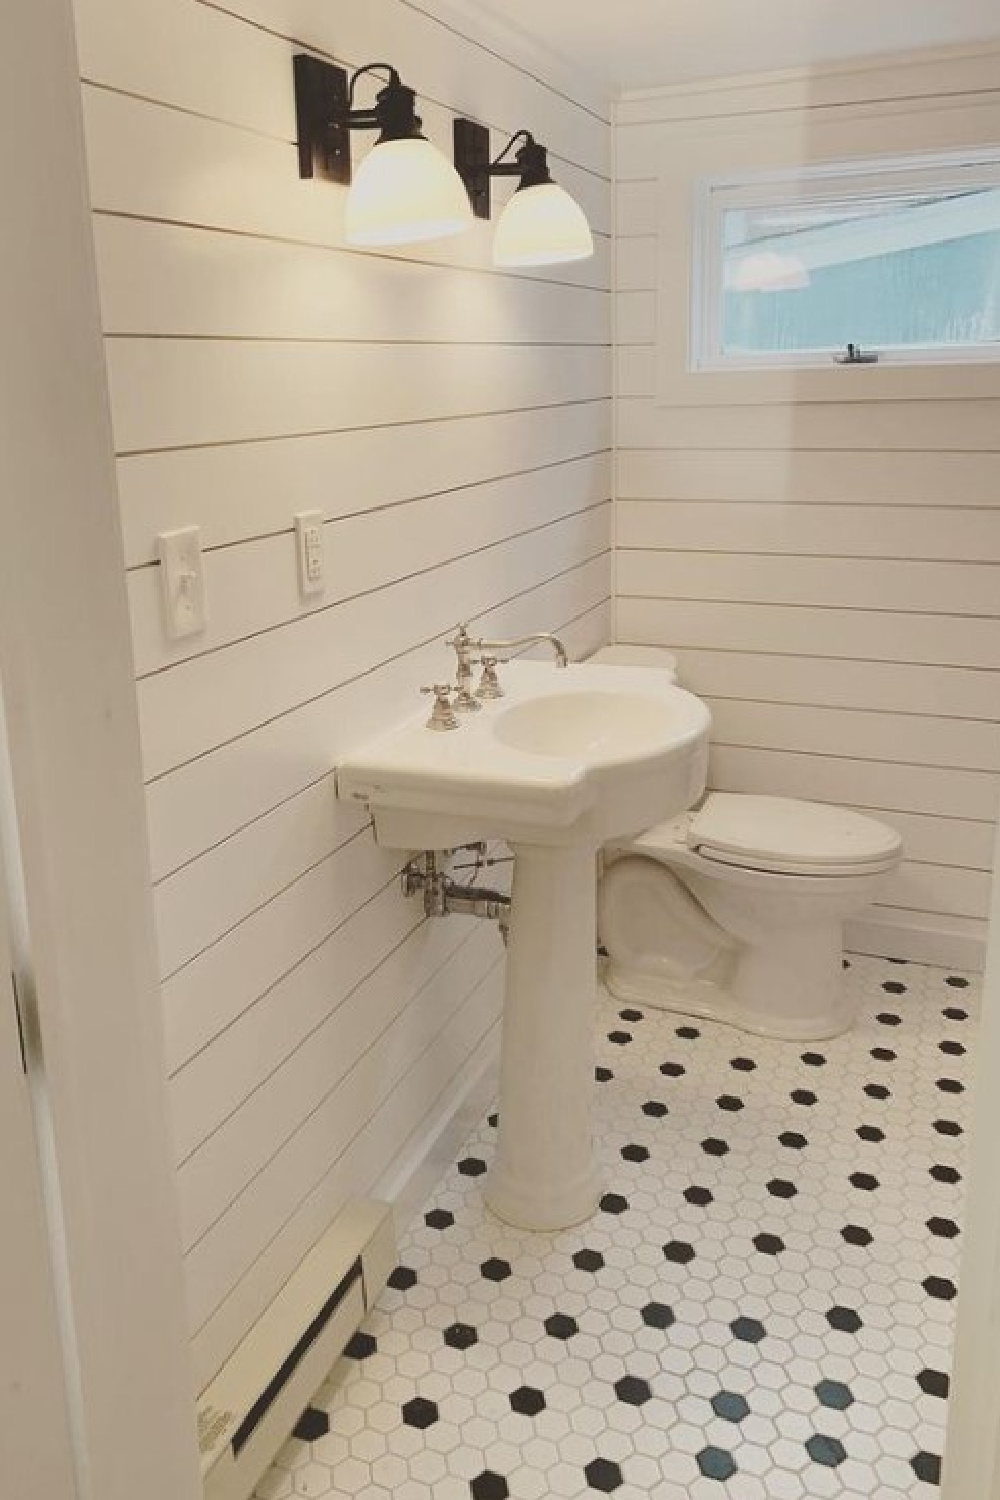 Decorator's White in a classic white bathroom with black and white hex tile flooring and shiplap - @daniellescoastalstyle.